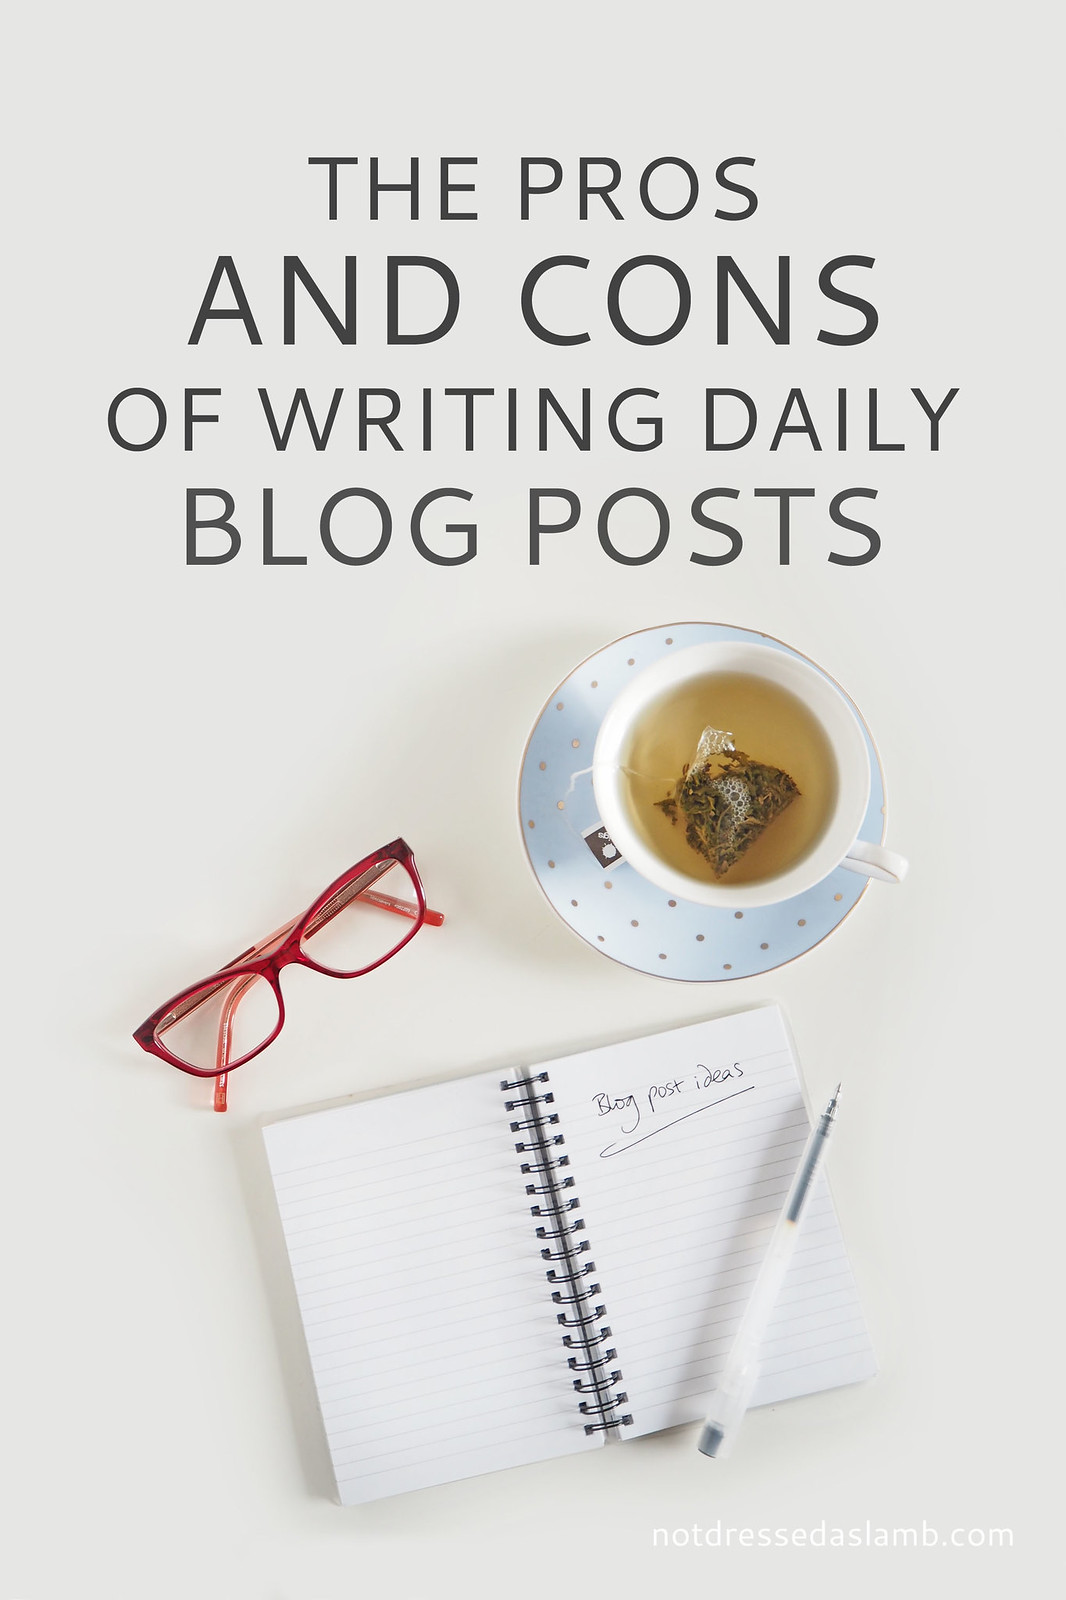 The Pros and Cons of Writing Daily Blog Posts | Blogging tips | Not Dressed As Lamb